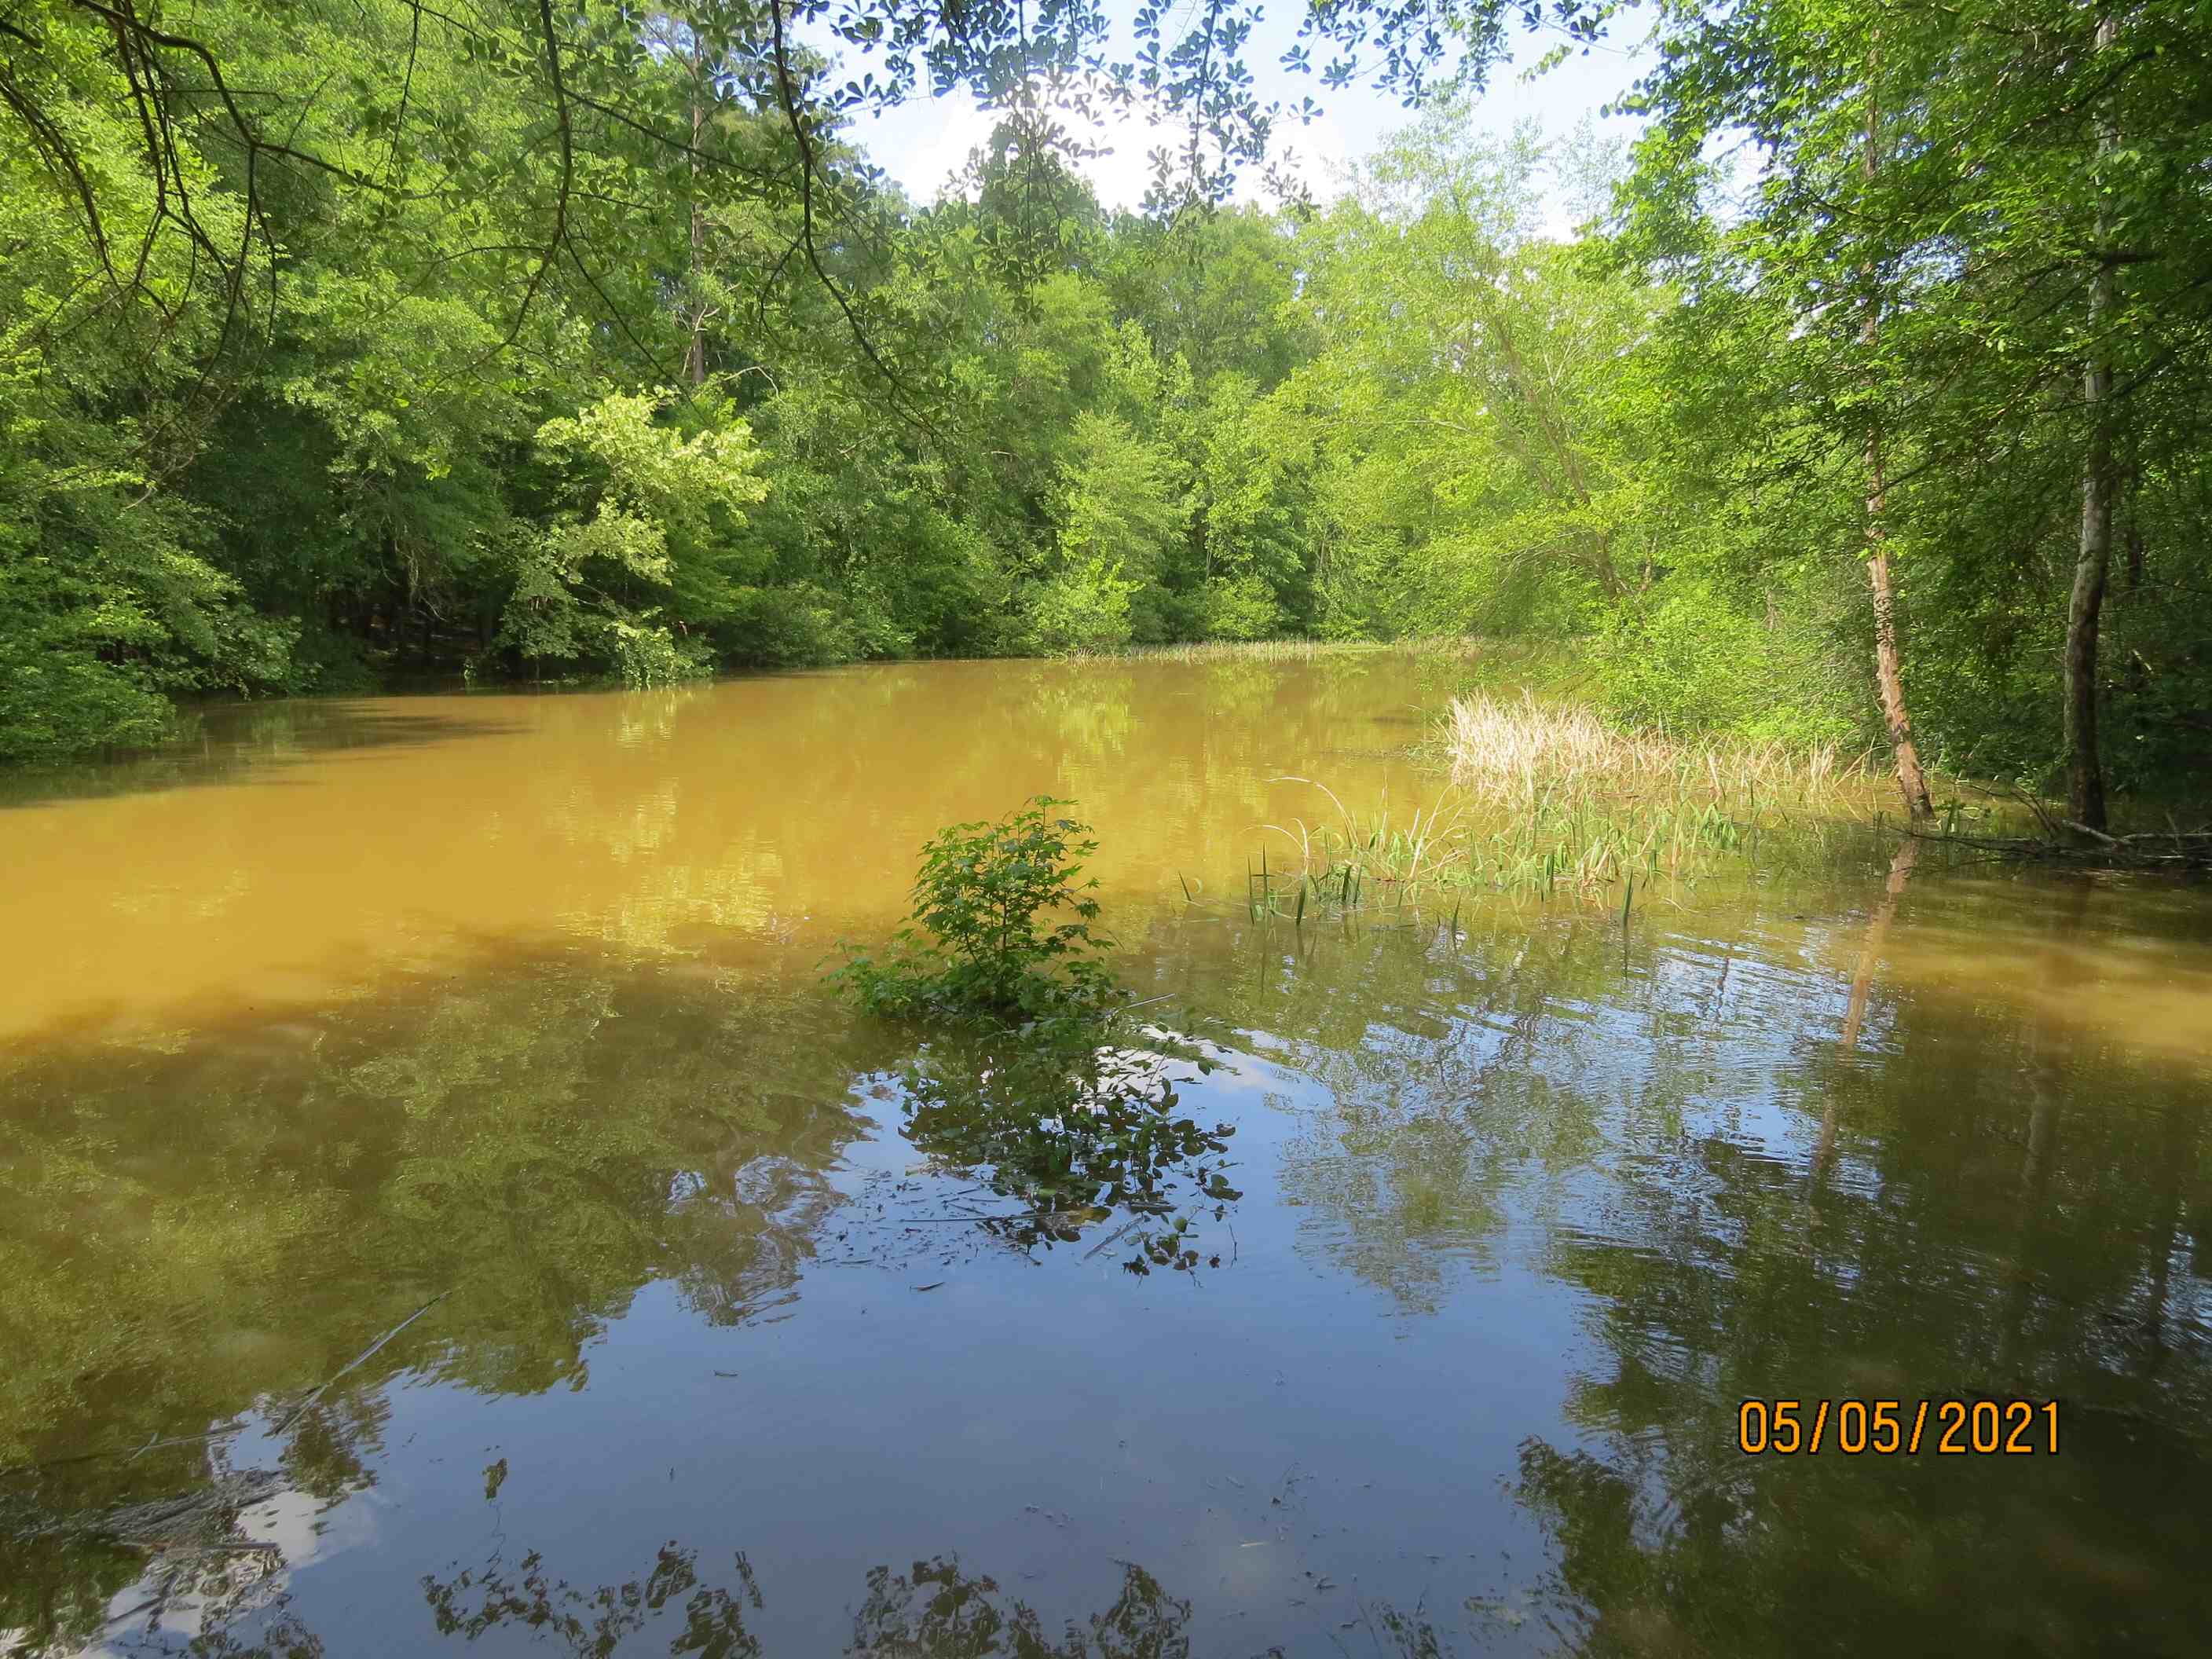 This 3-acre pond is an inlet from the Coosa River and the property surrounds it